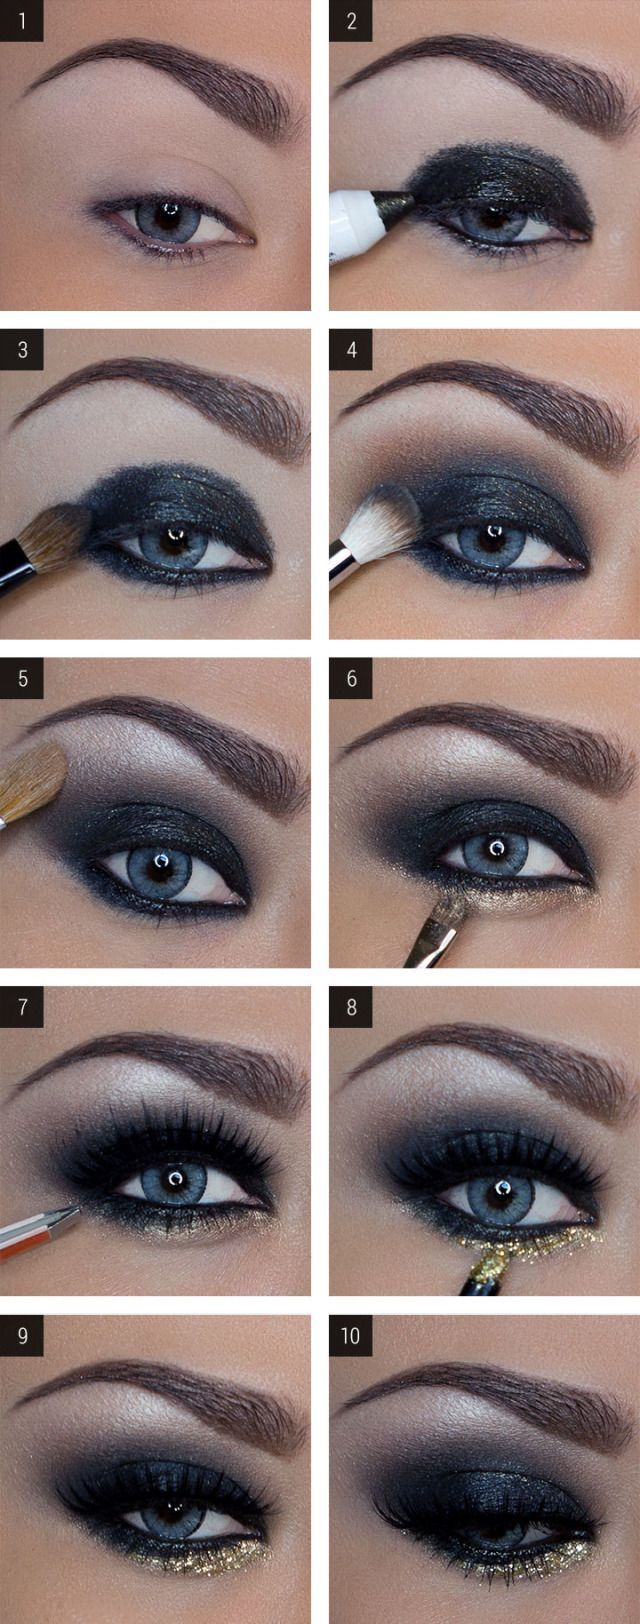 Simple Dark Eye Makeup Simple Party Makeup Tips For Black Women To Look Gorgeous